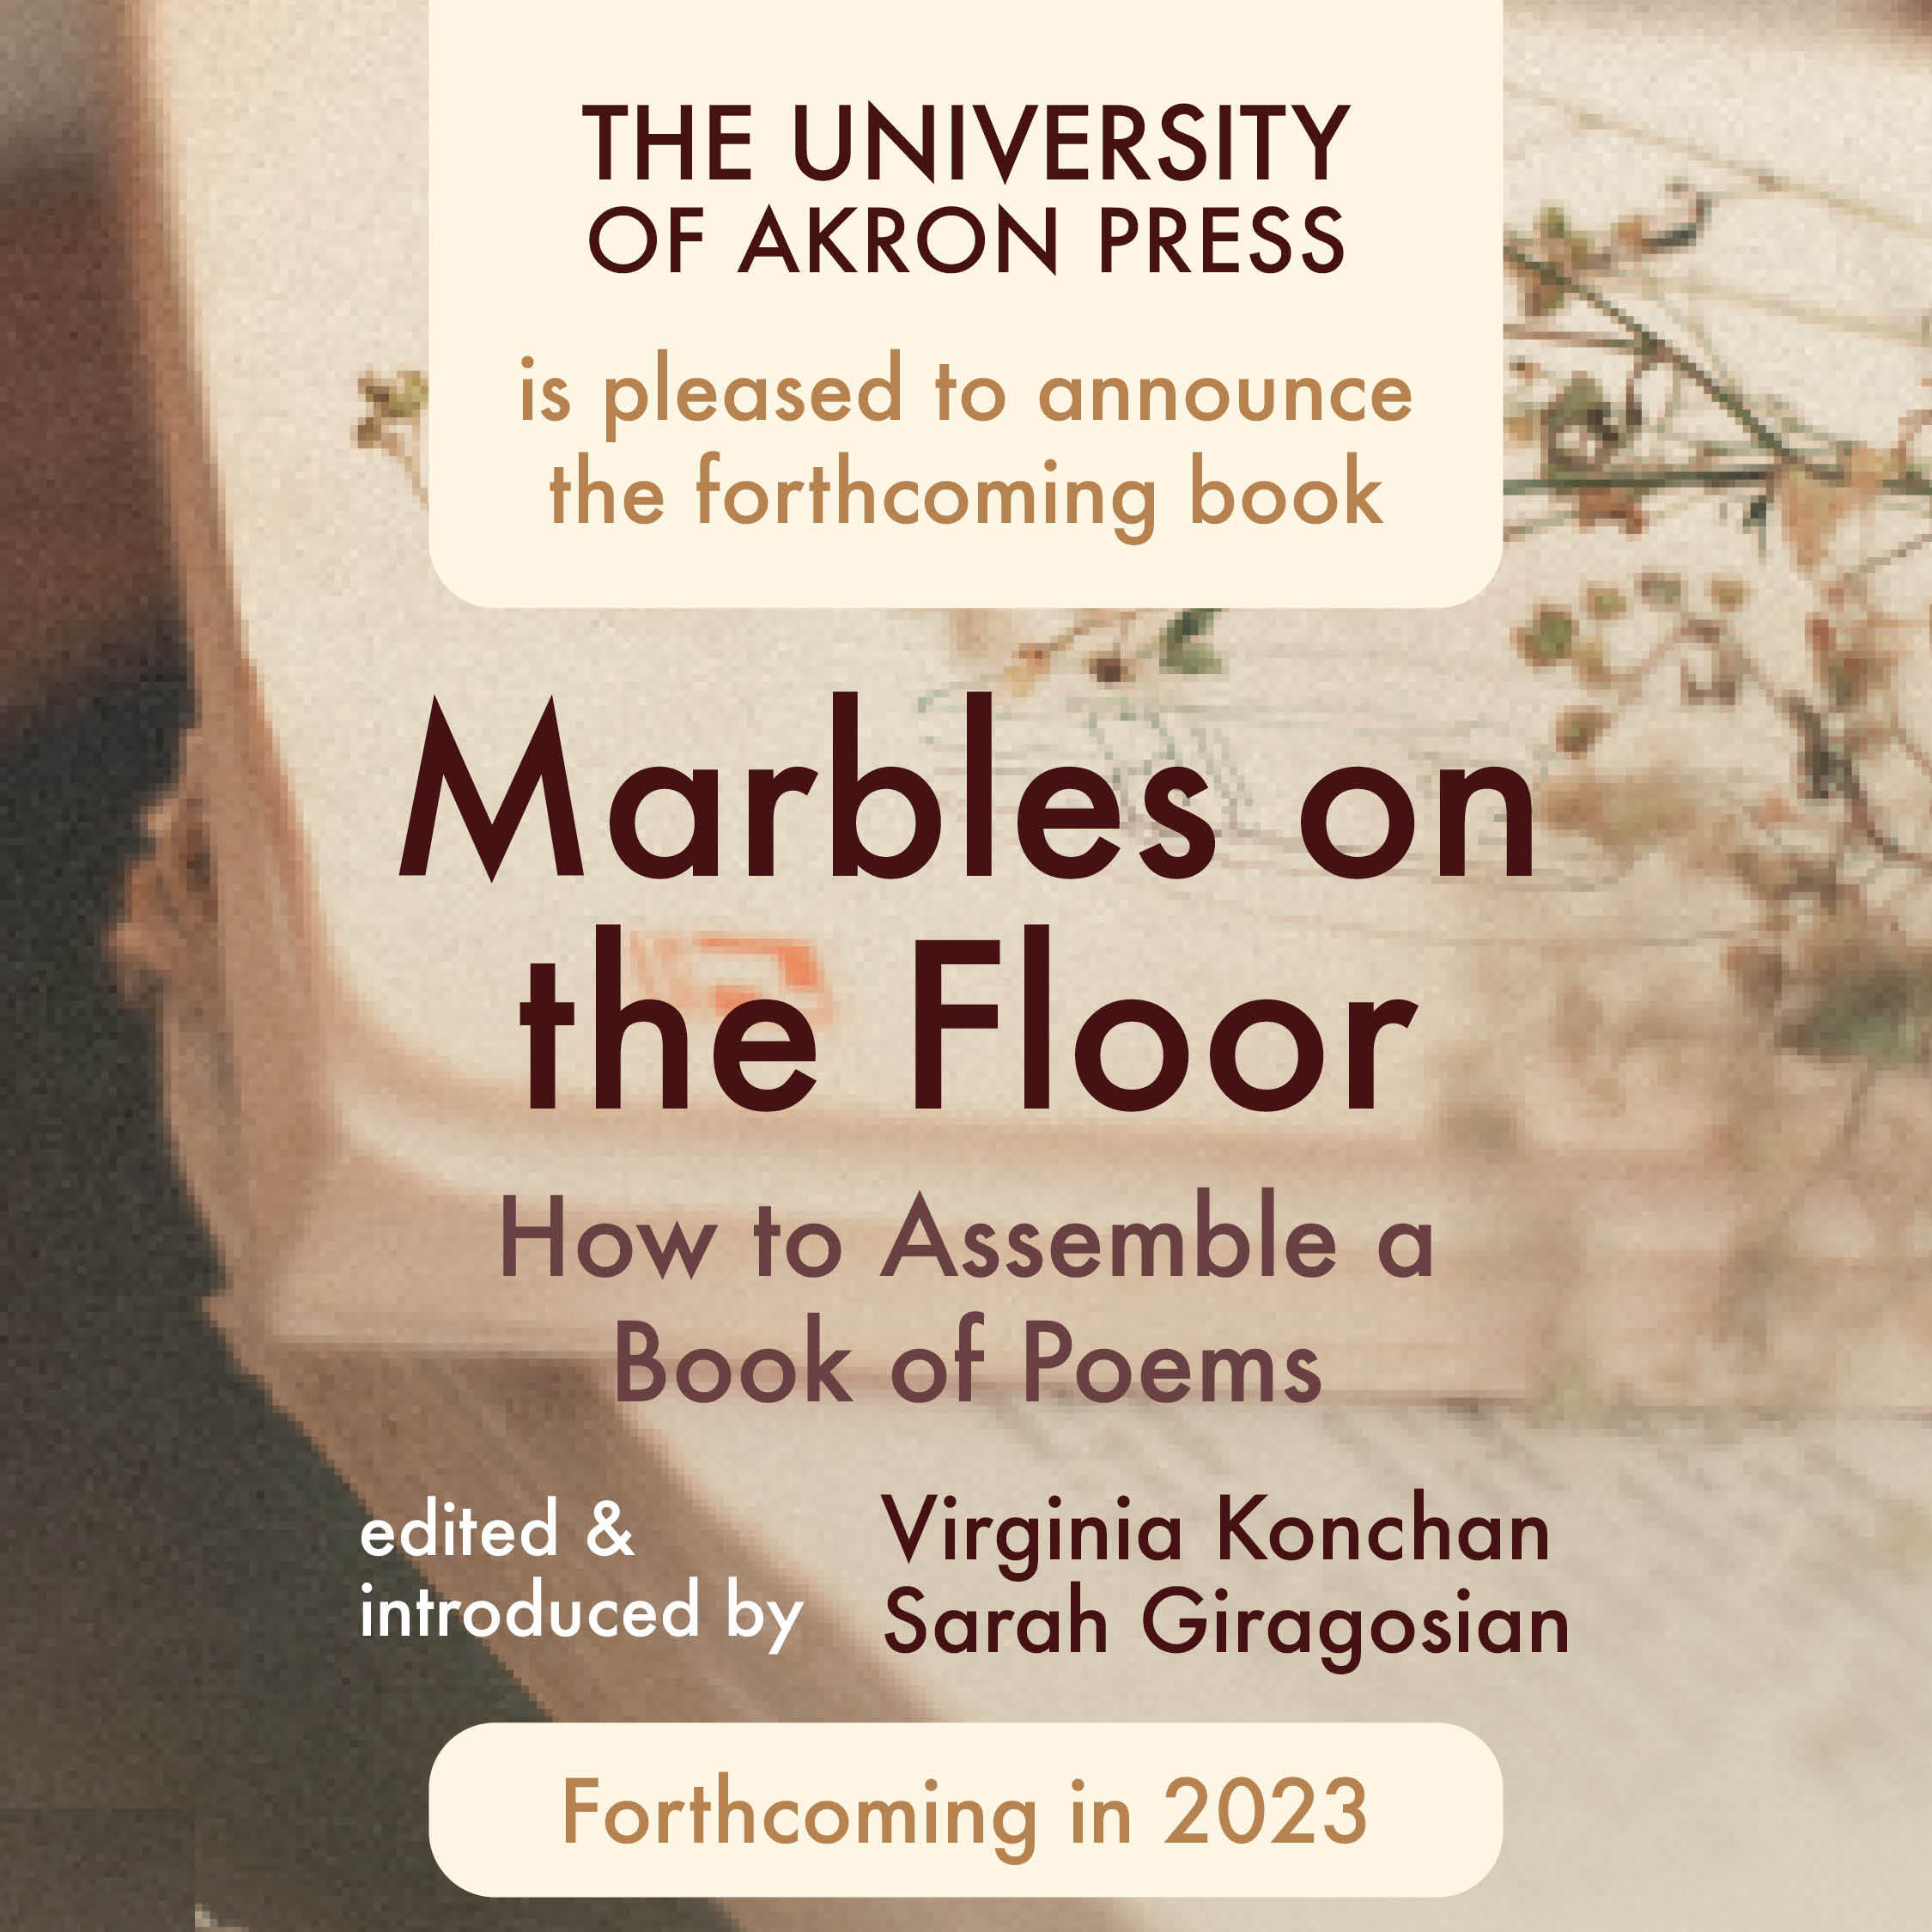 Marbles on the Floor announcement